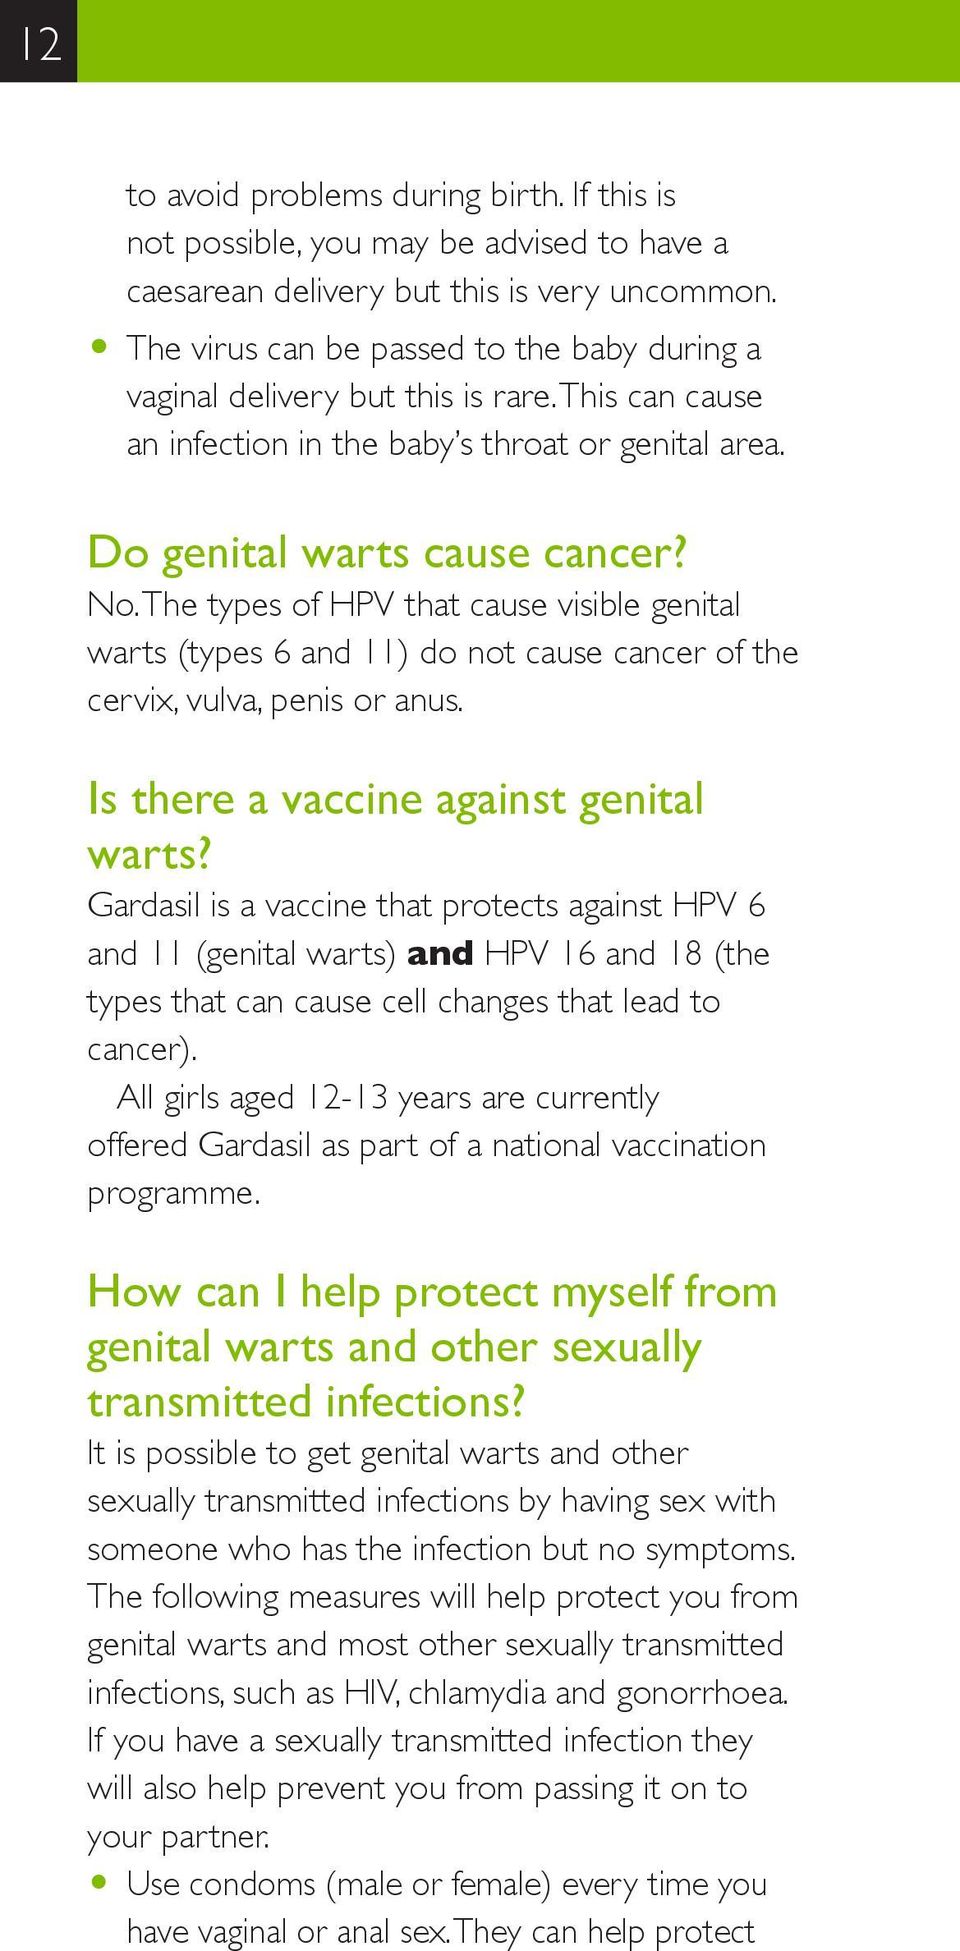 The types of HPV that cause visible genital warts (types 6 and 11) do not cause cancer of the cervix, vulva, penis or anus. Is there a vaccine against genital warts?